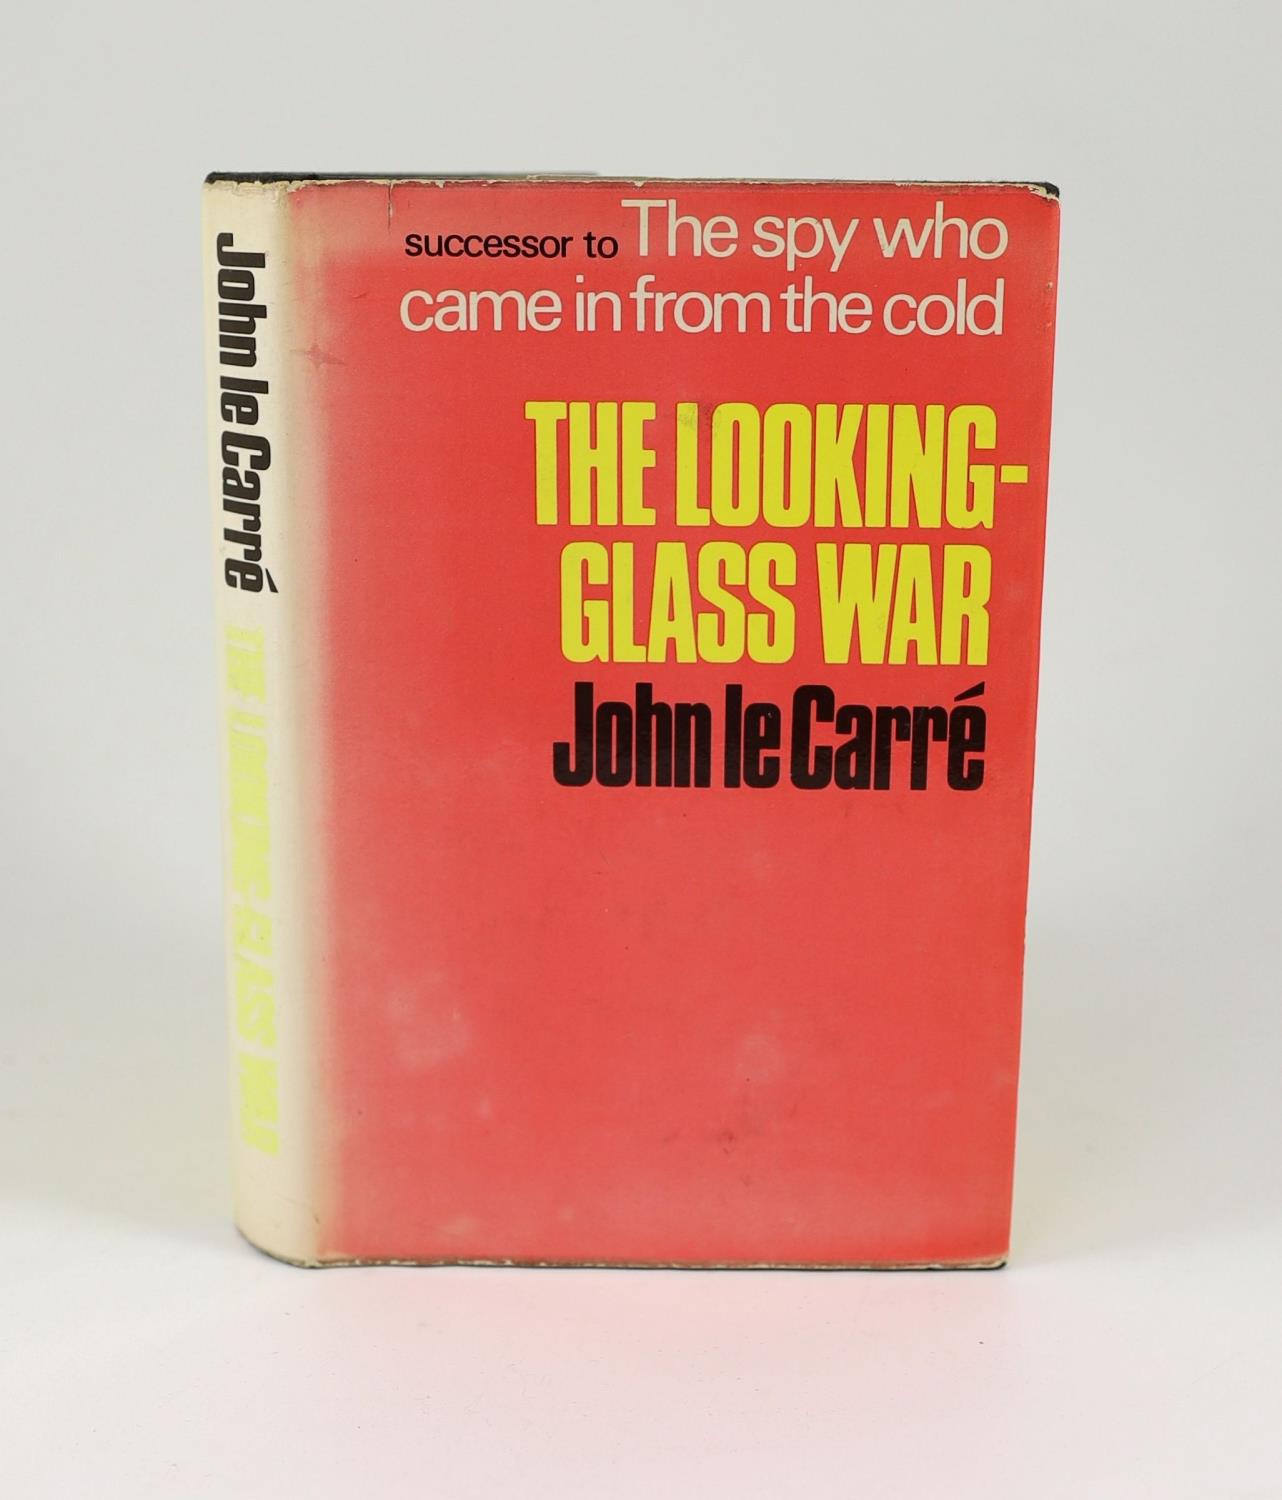 ° ° Le Carre, John - The Looking-Glass War, 1st edition, in unclipped d/j, spine sunned,